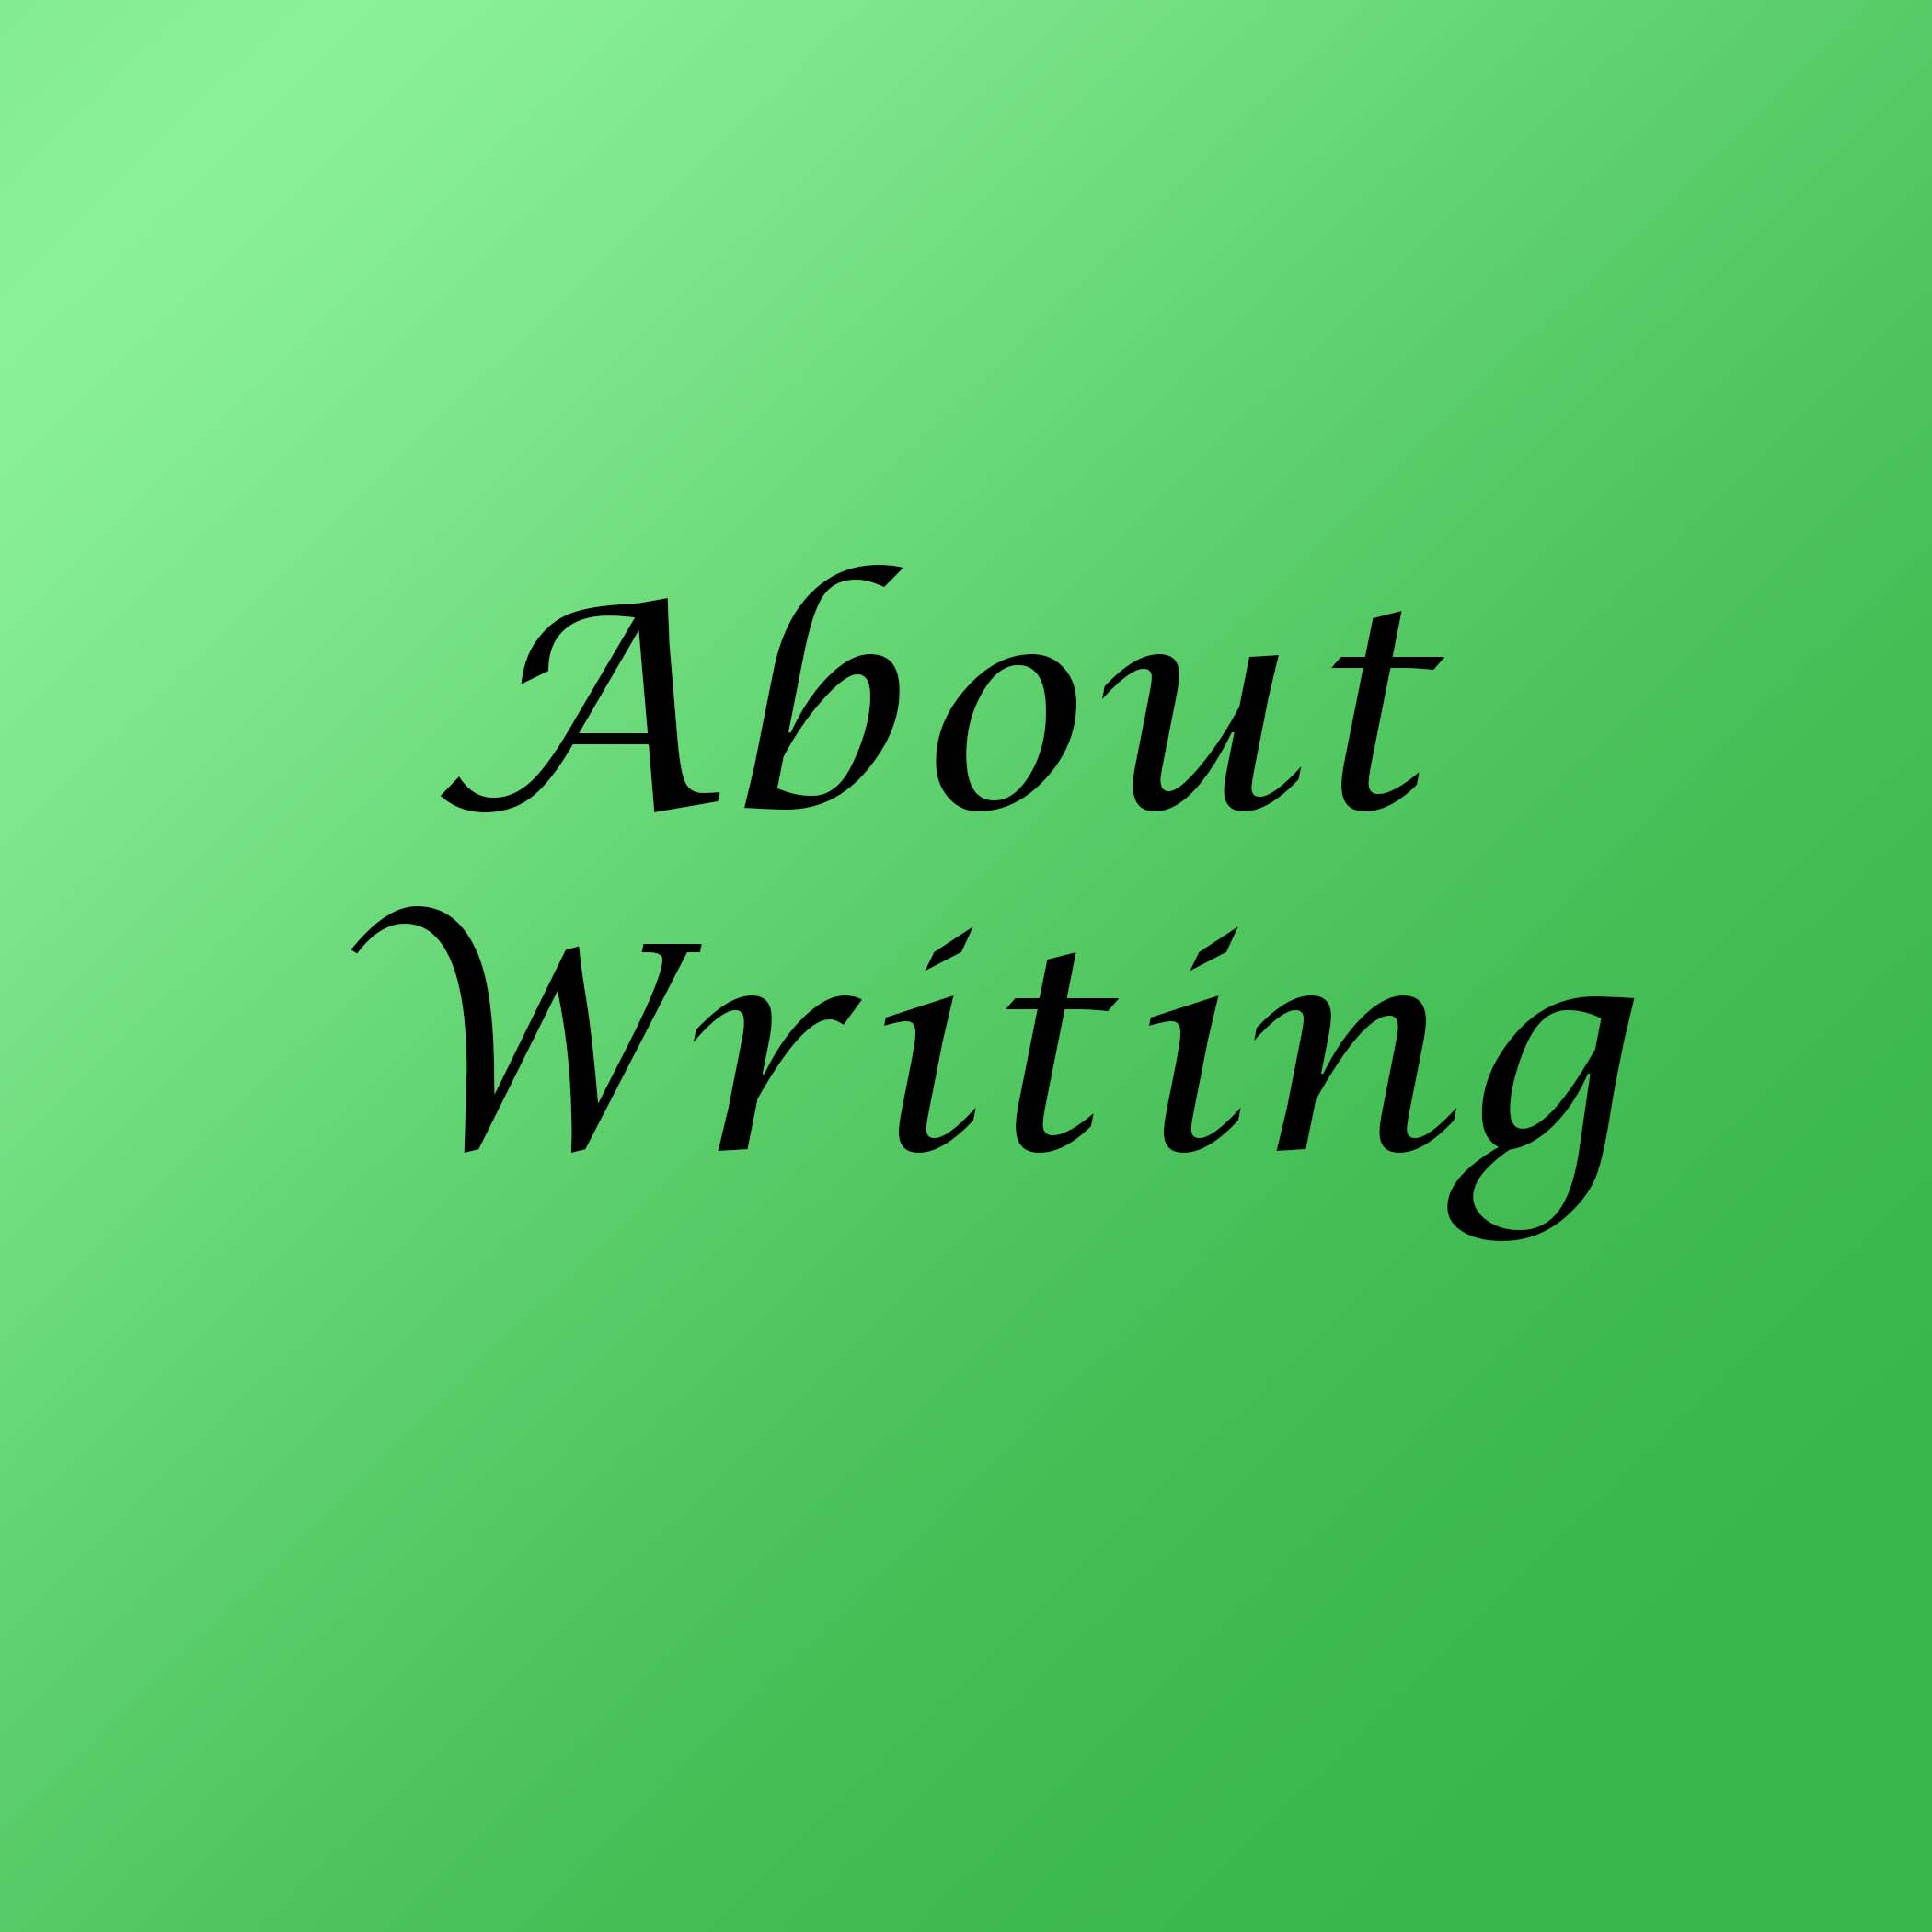 About Writing